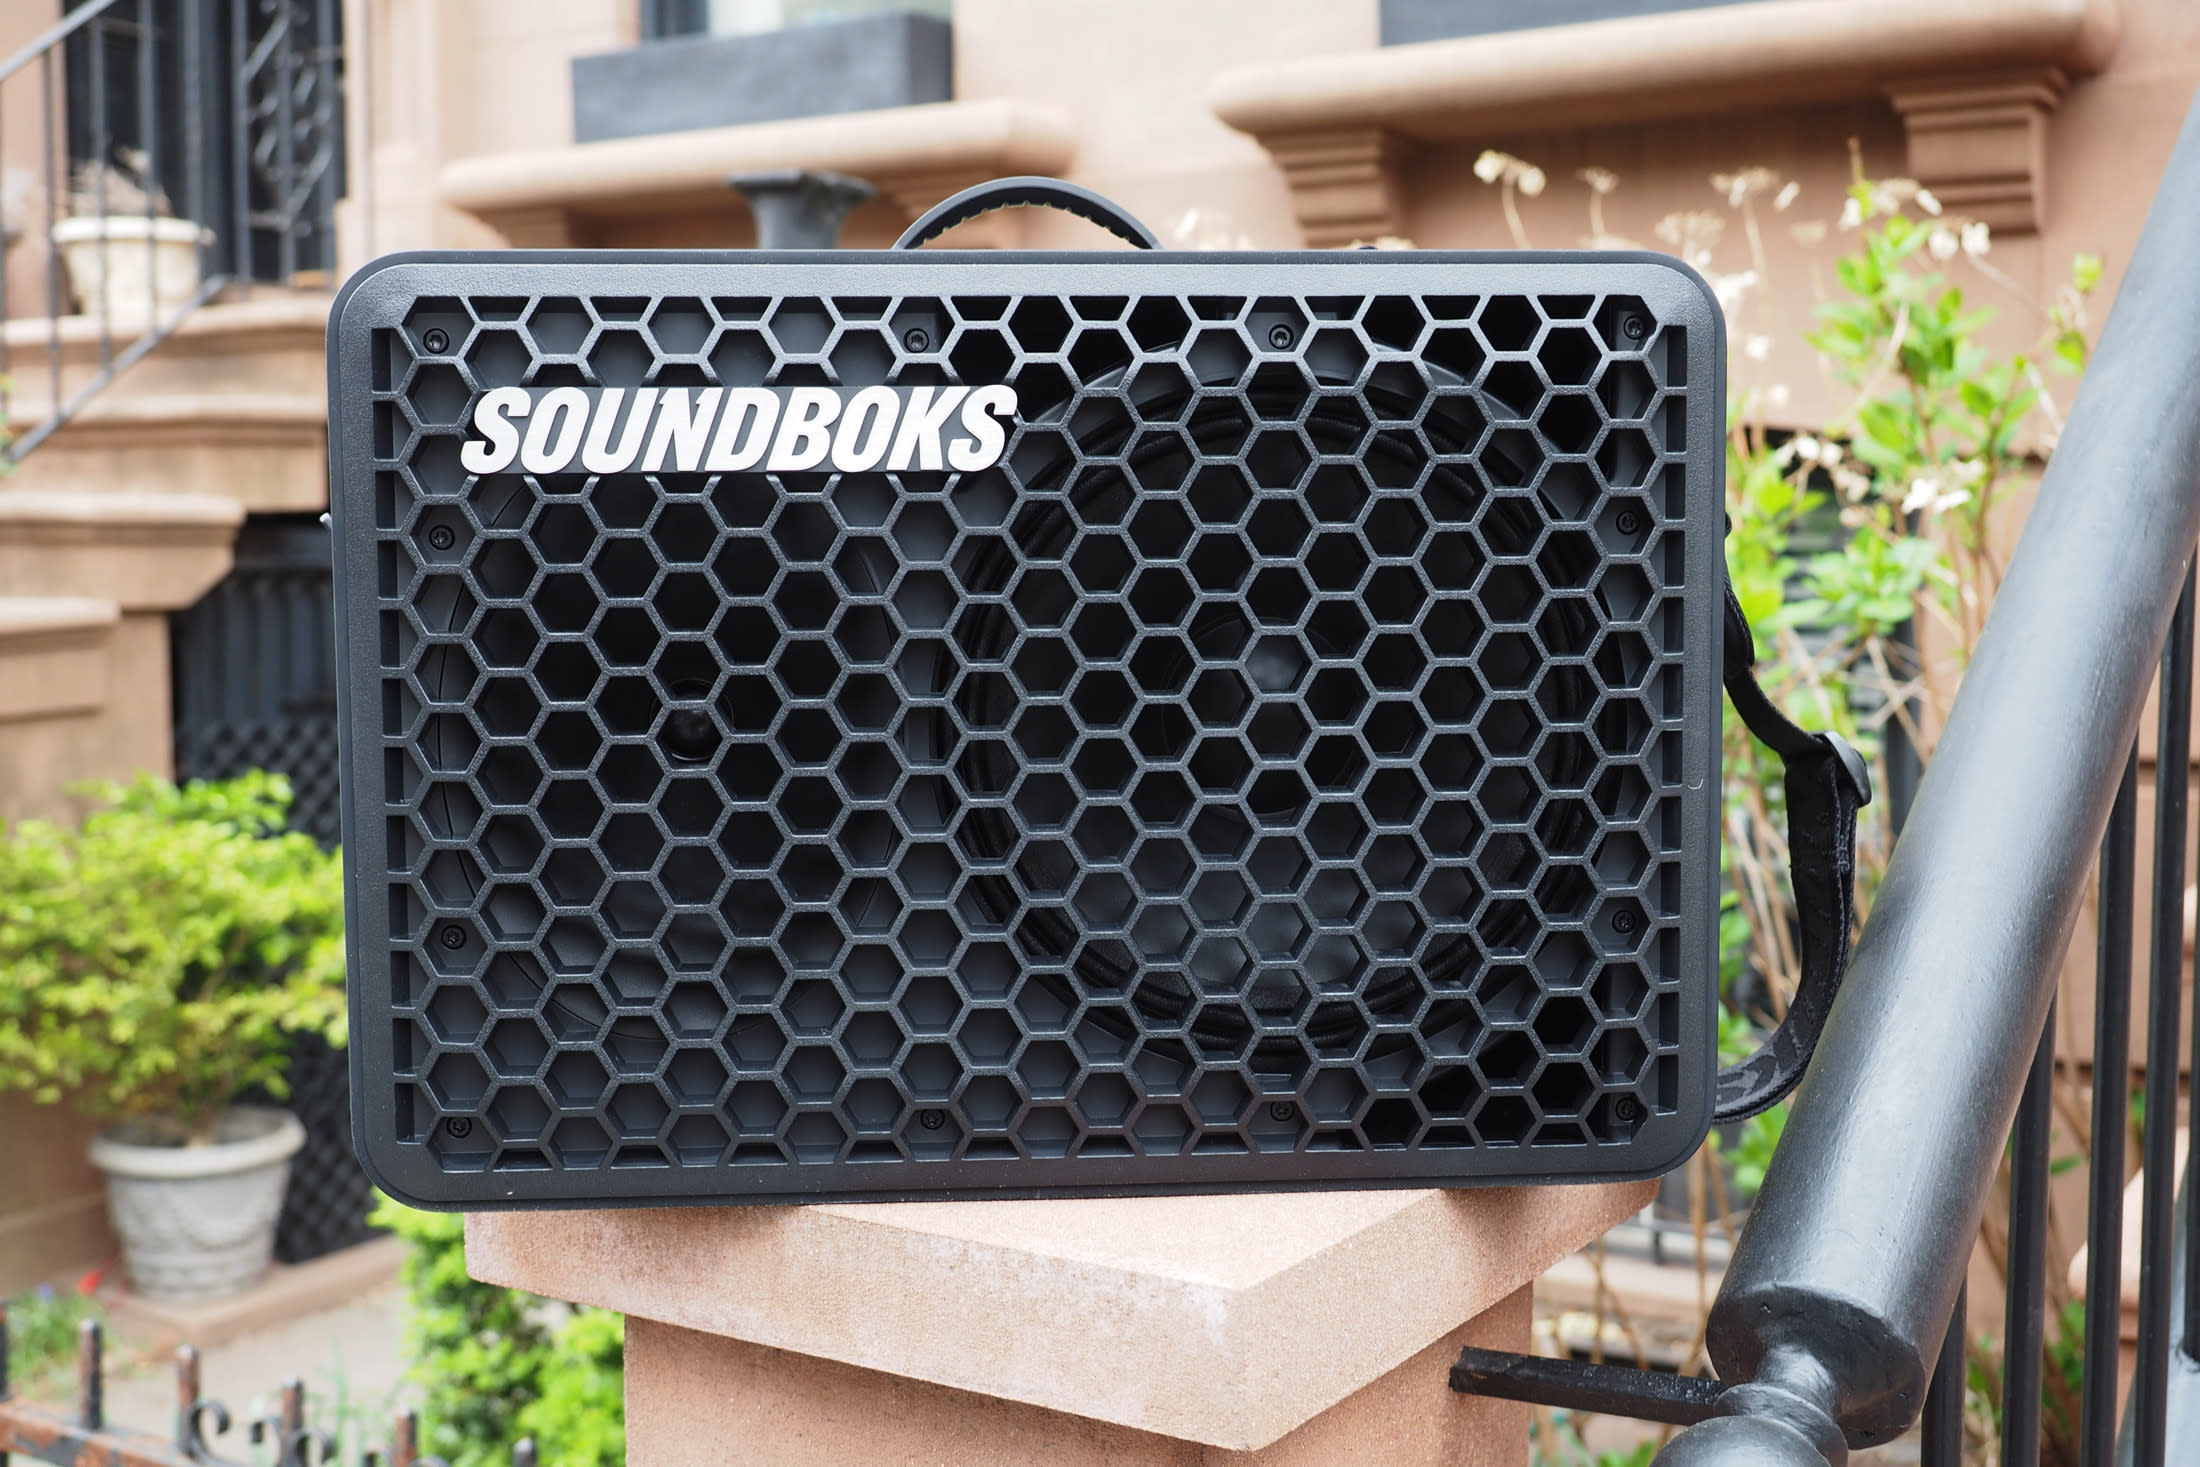 The Soundboks Go portable Bluetooth speaker sitting in front of a Brooklyn brownstone, with plants, stairs and railings in the background.